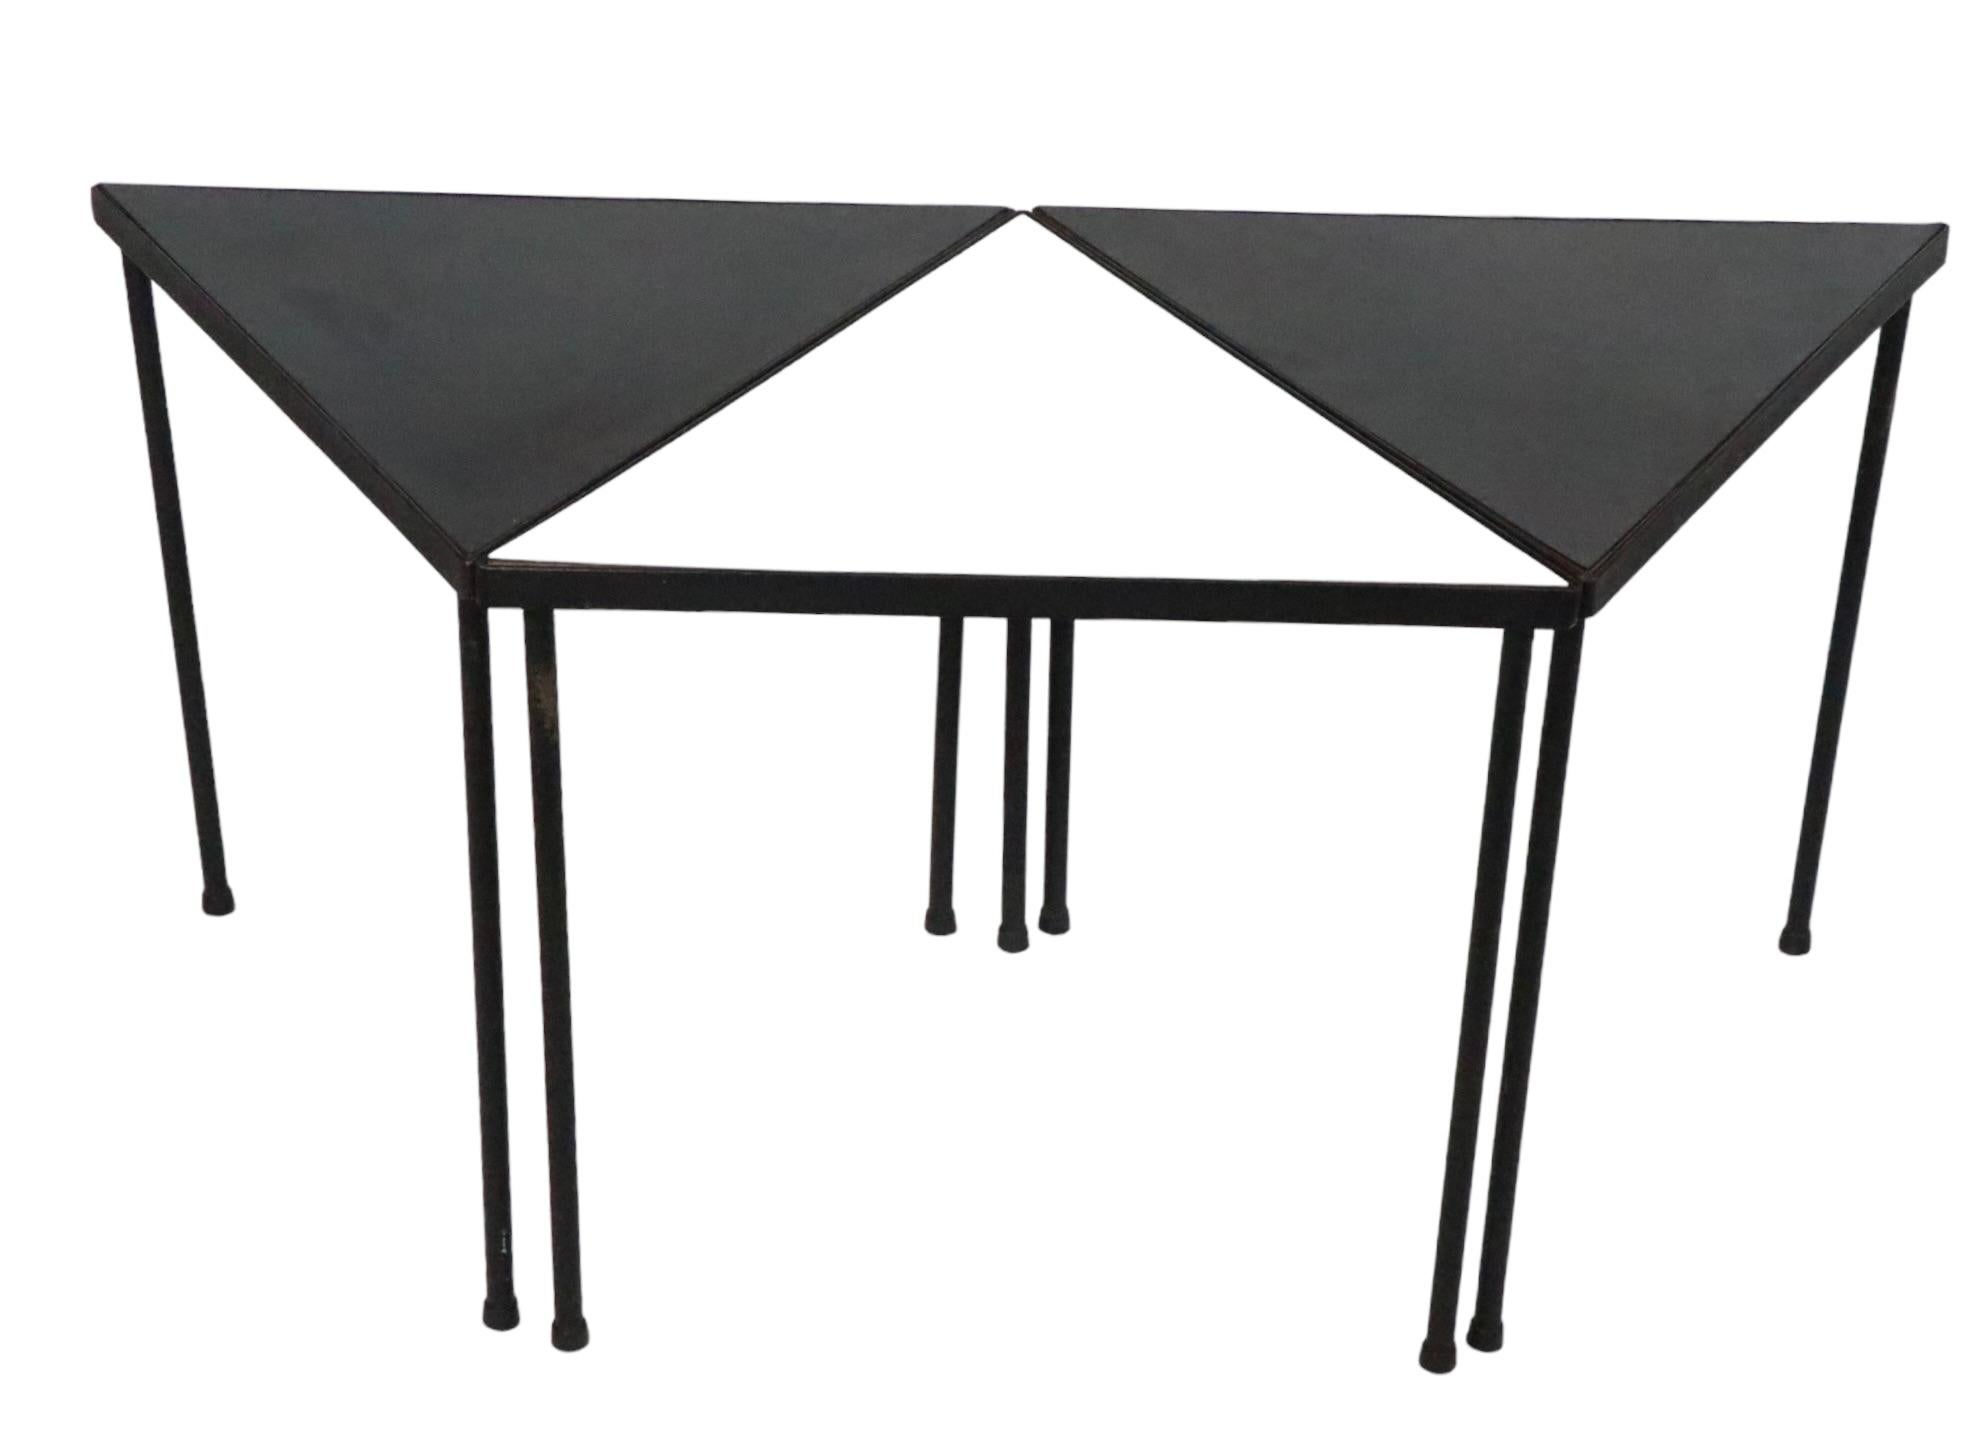  Set of 3 Mid Century Triangular  Stacking Tables by Frederic  Weinberg c 1950's For Sale 11